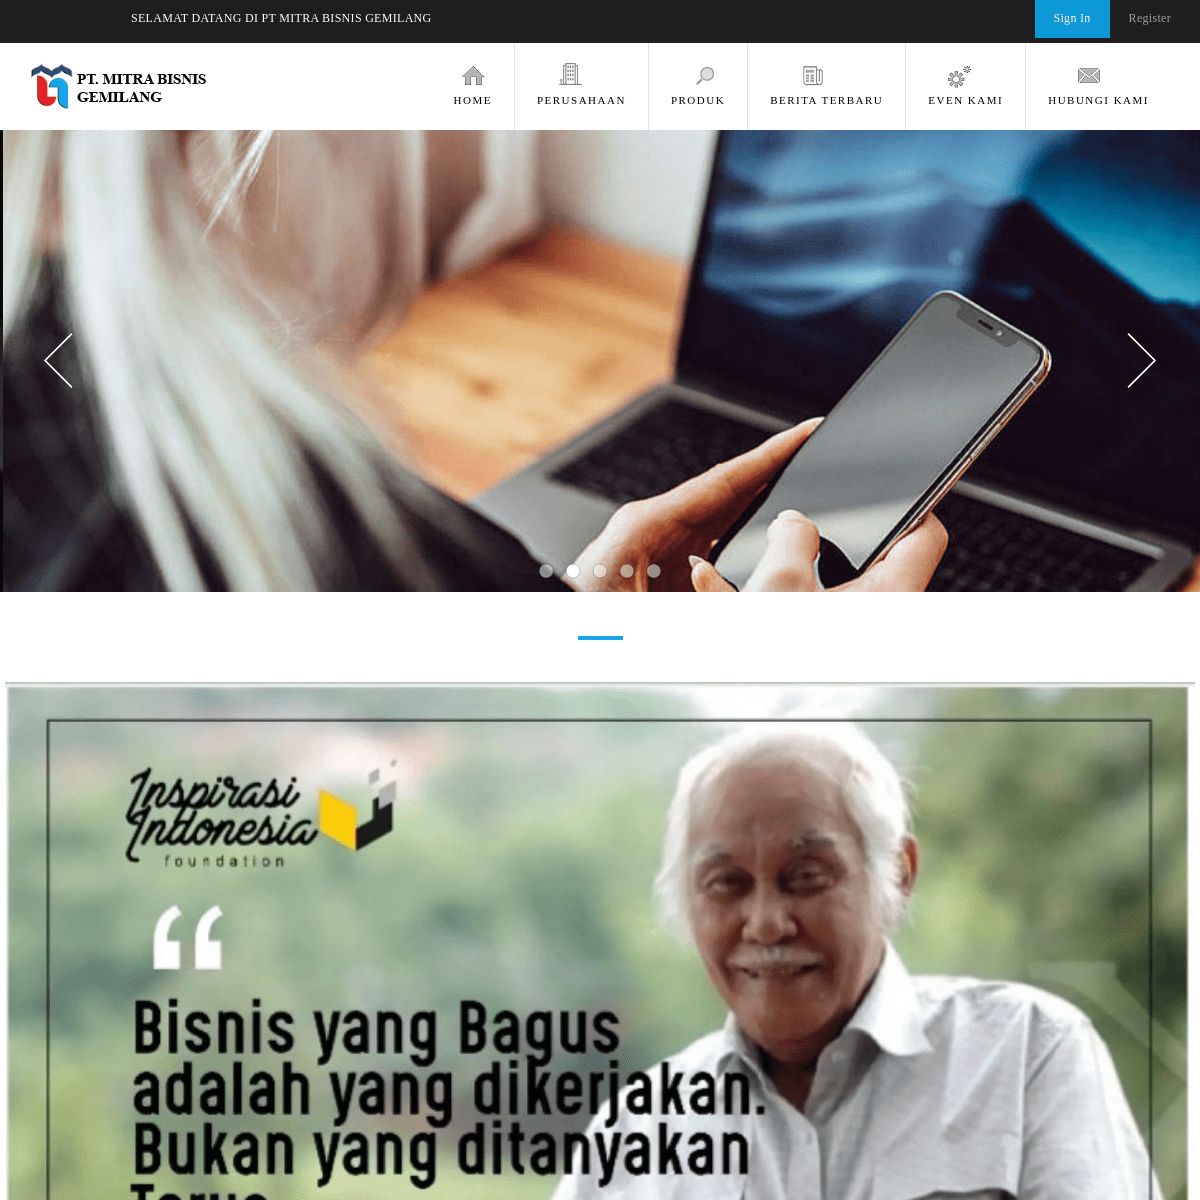 A complete backup of mbgindonesia.com